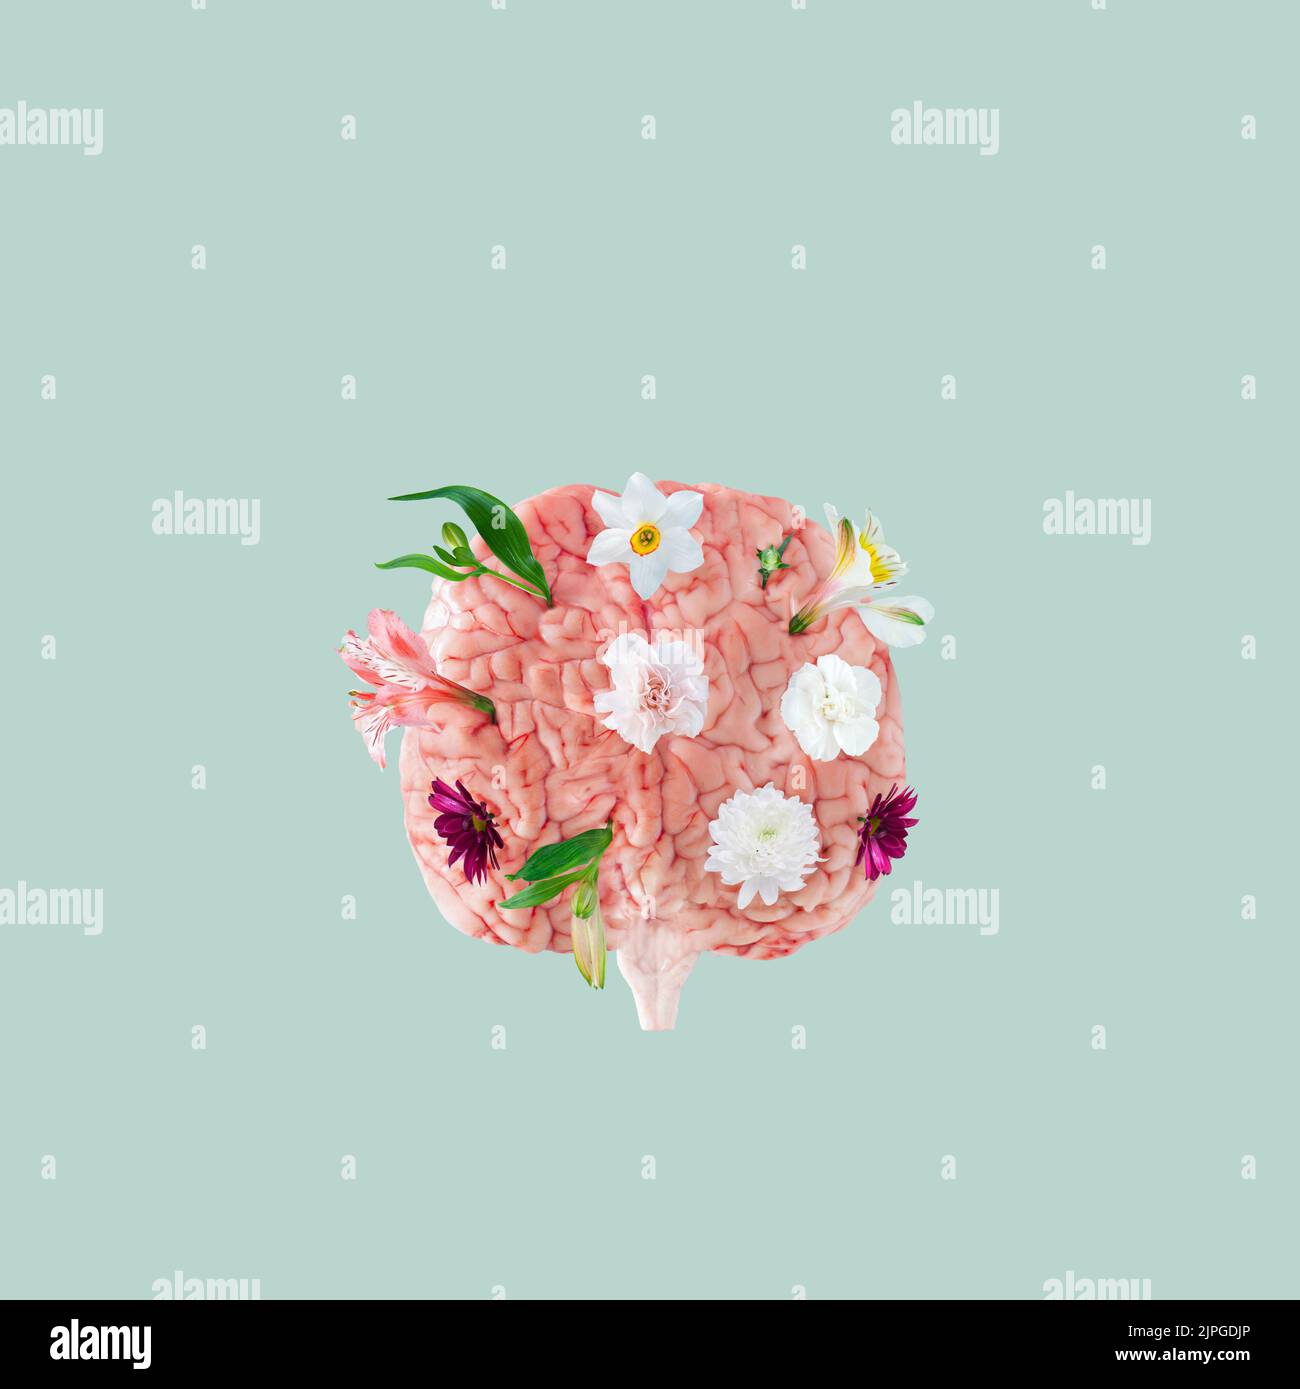 Creative arrangement with brain and colorful flowers over mint pastel background. Minimal concept of calm, mental health, and emotional wellness. Stock Photo